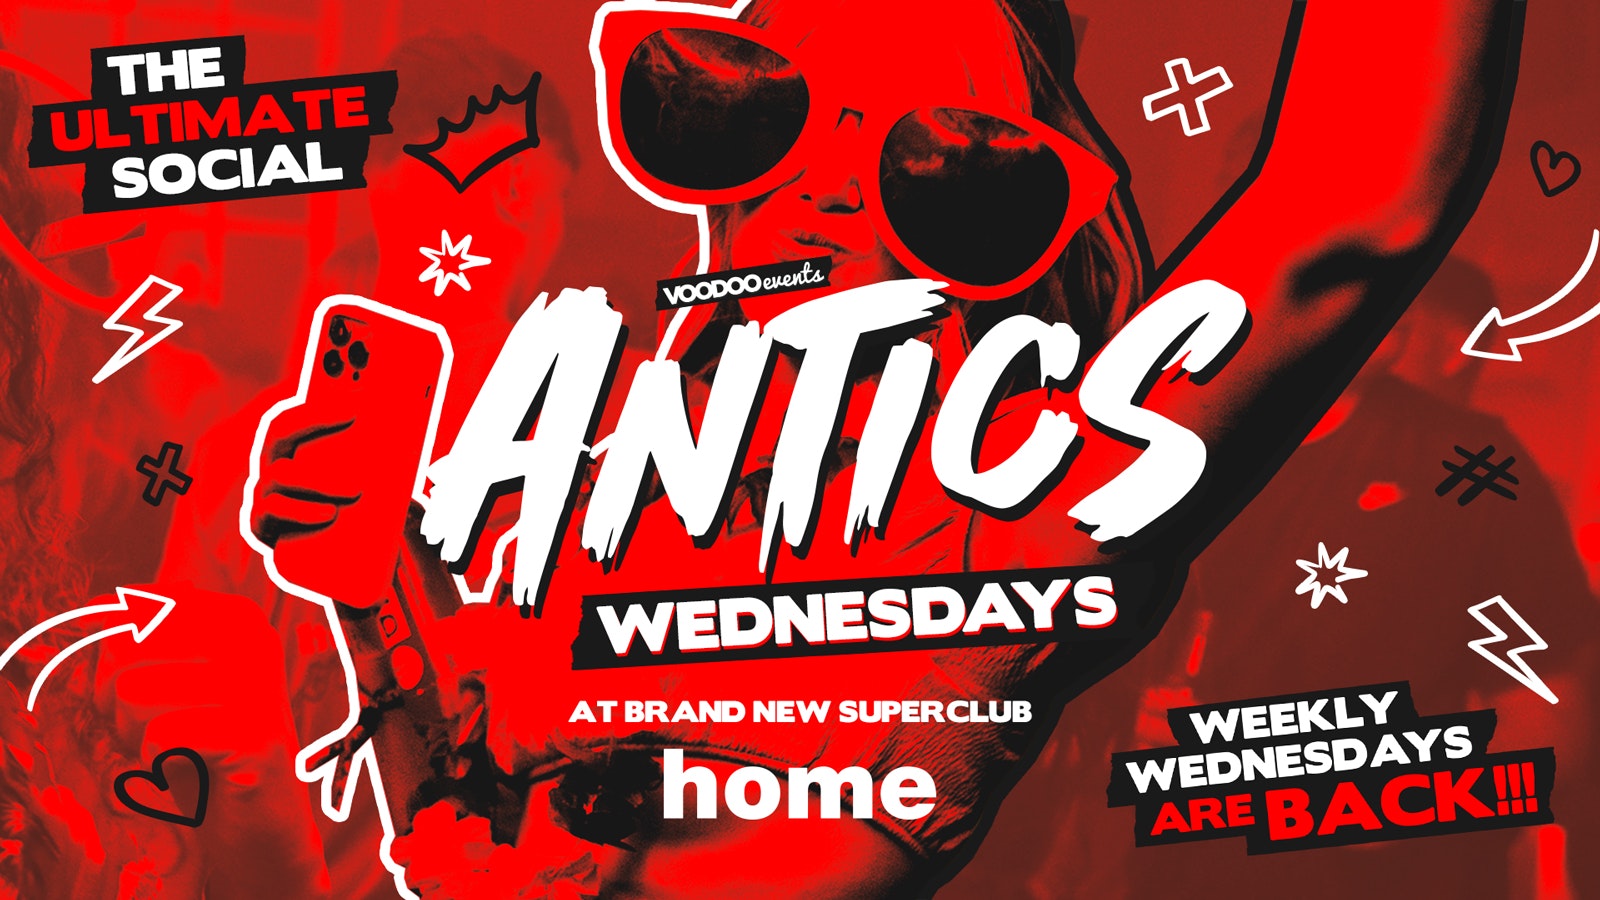 Antics @ THE BRAND NEW SUPER CLUB HOME – Wednesday 7th August